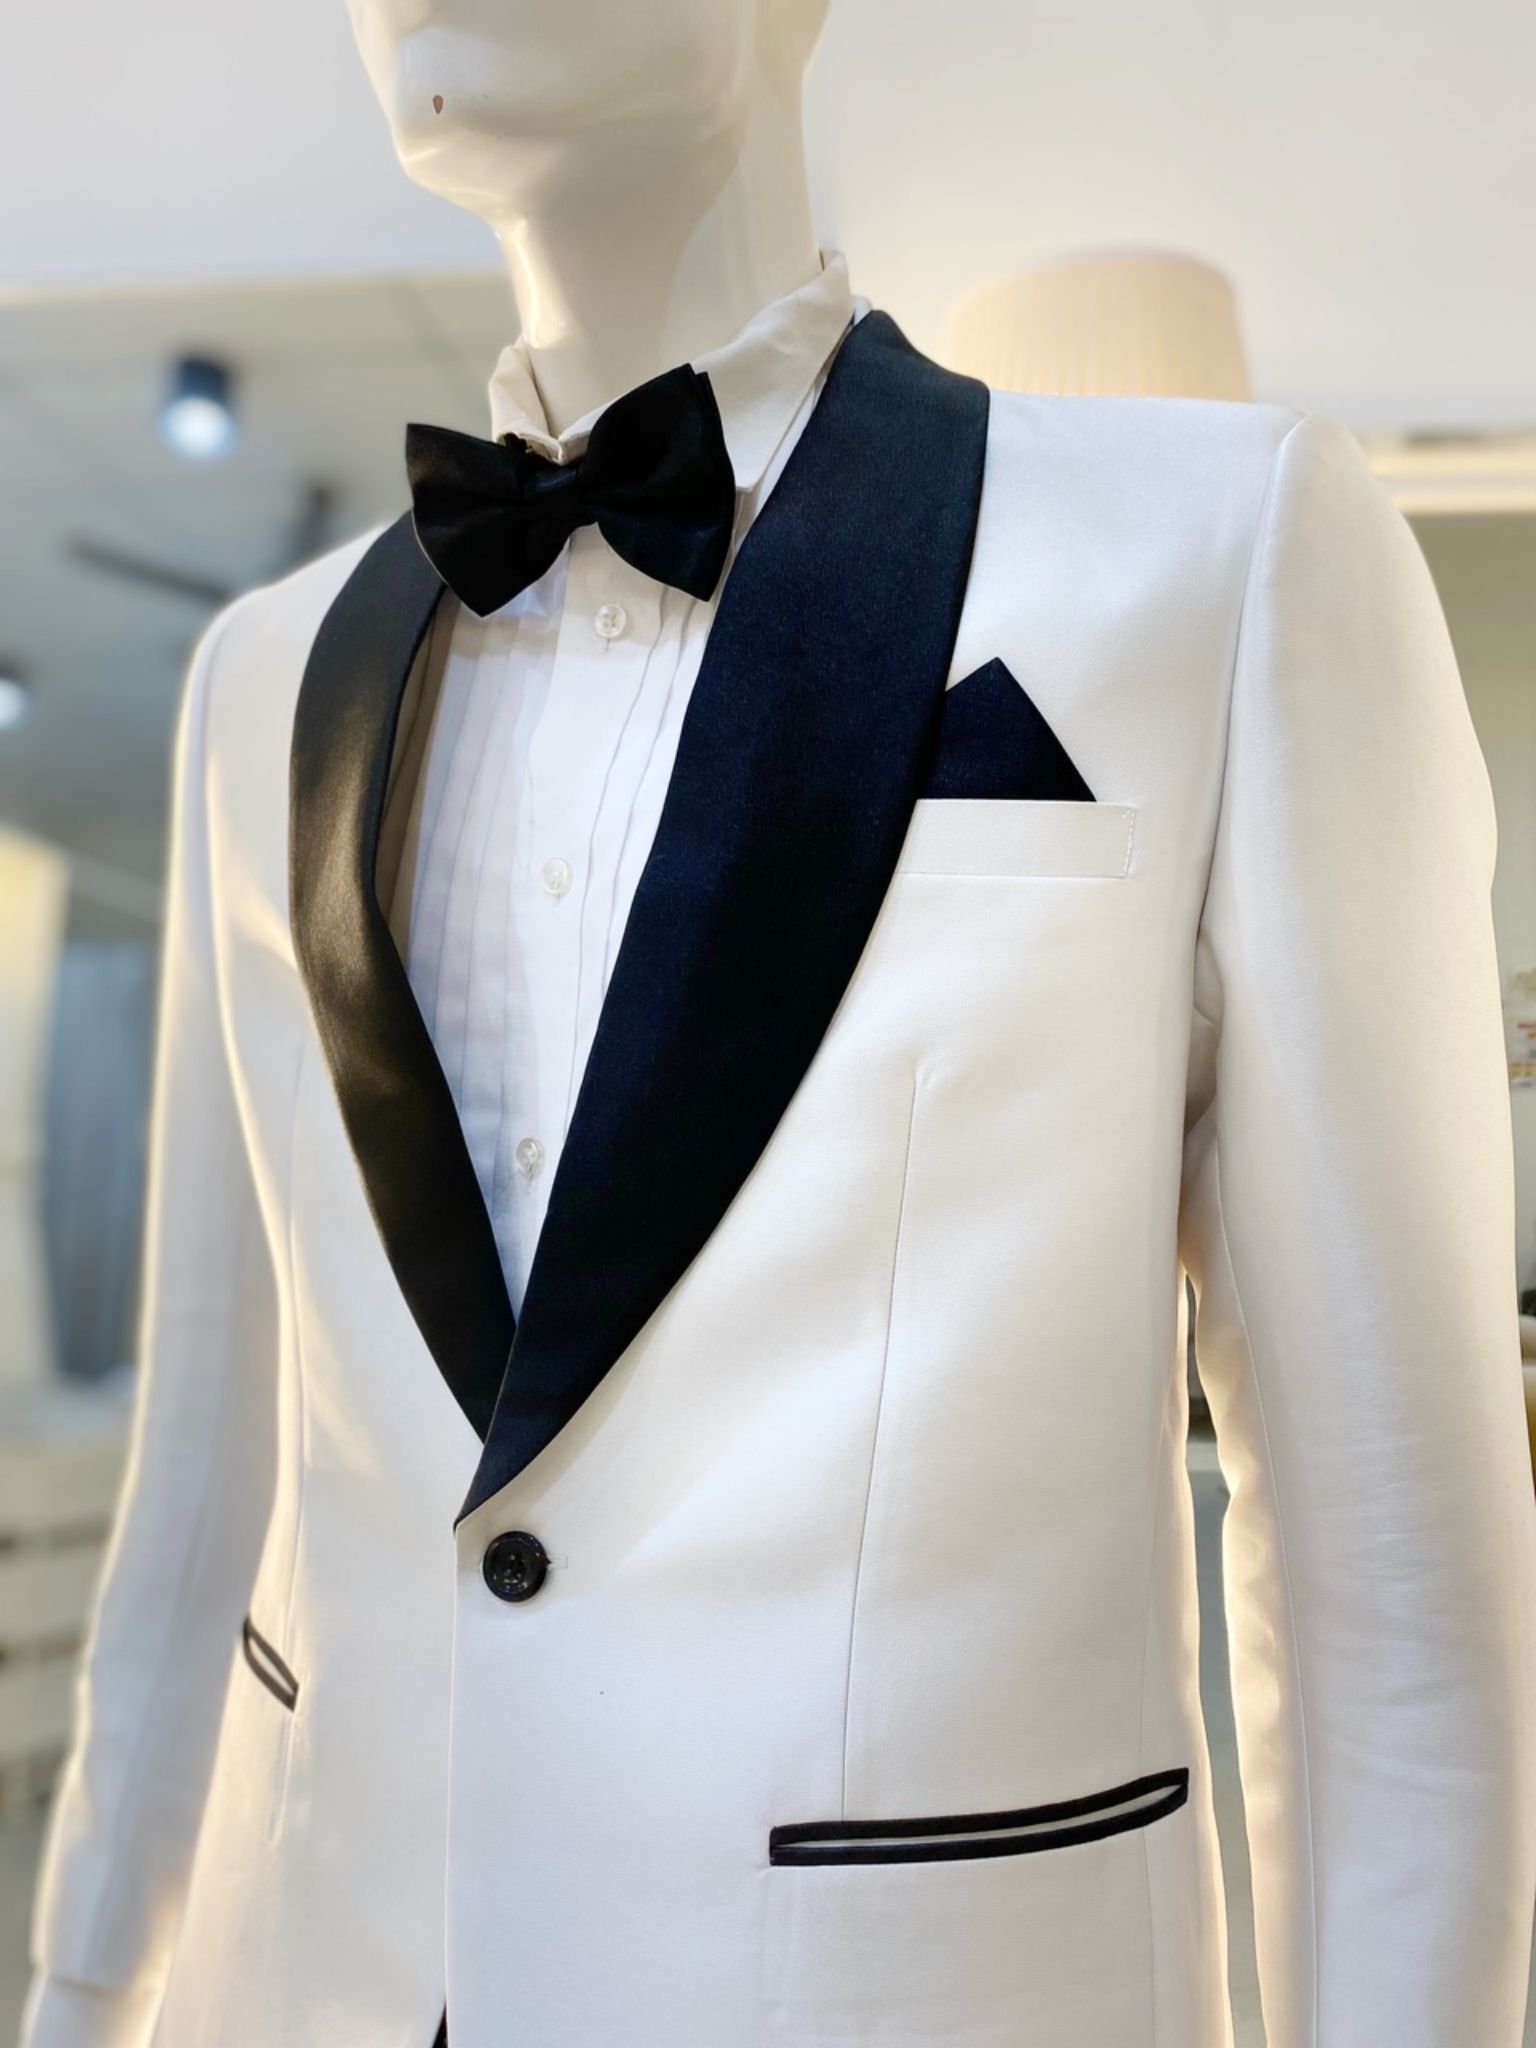 Signature Suit (White 1): A man in a white tuxedo with a shawl lapel. He looks confident and stylish, ready to make a lasting impression at his next formal event. The tuxedo is made from luxurious Mikado fabric and is perfect for weddings, galas, and any other special occasion-tuxedo-white-tuxedo-pearl-white-tuxedo-shawl-lapel-tuxedo-formal-wear-wedding-attire-gala-attire-men's-suits-mikado-fabric-affordable-luxury-rental